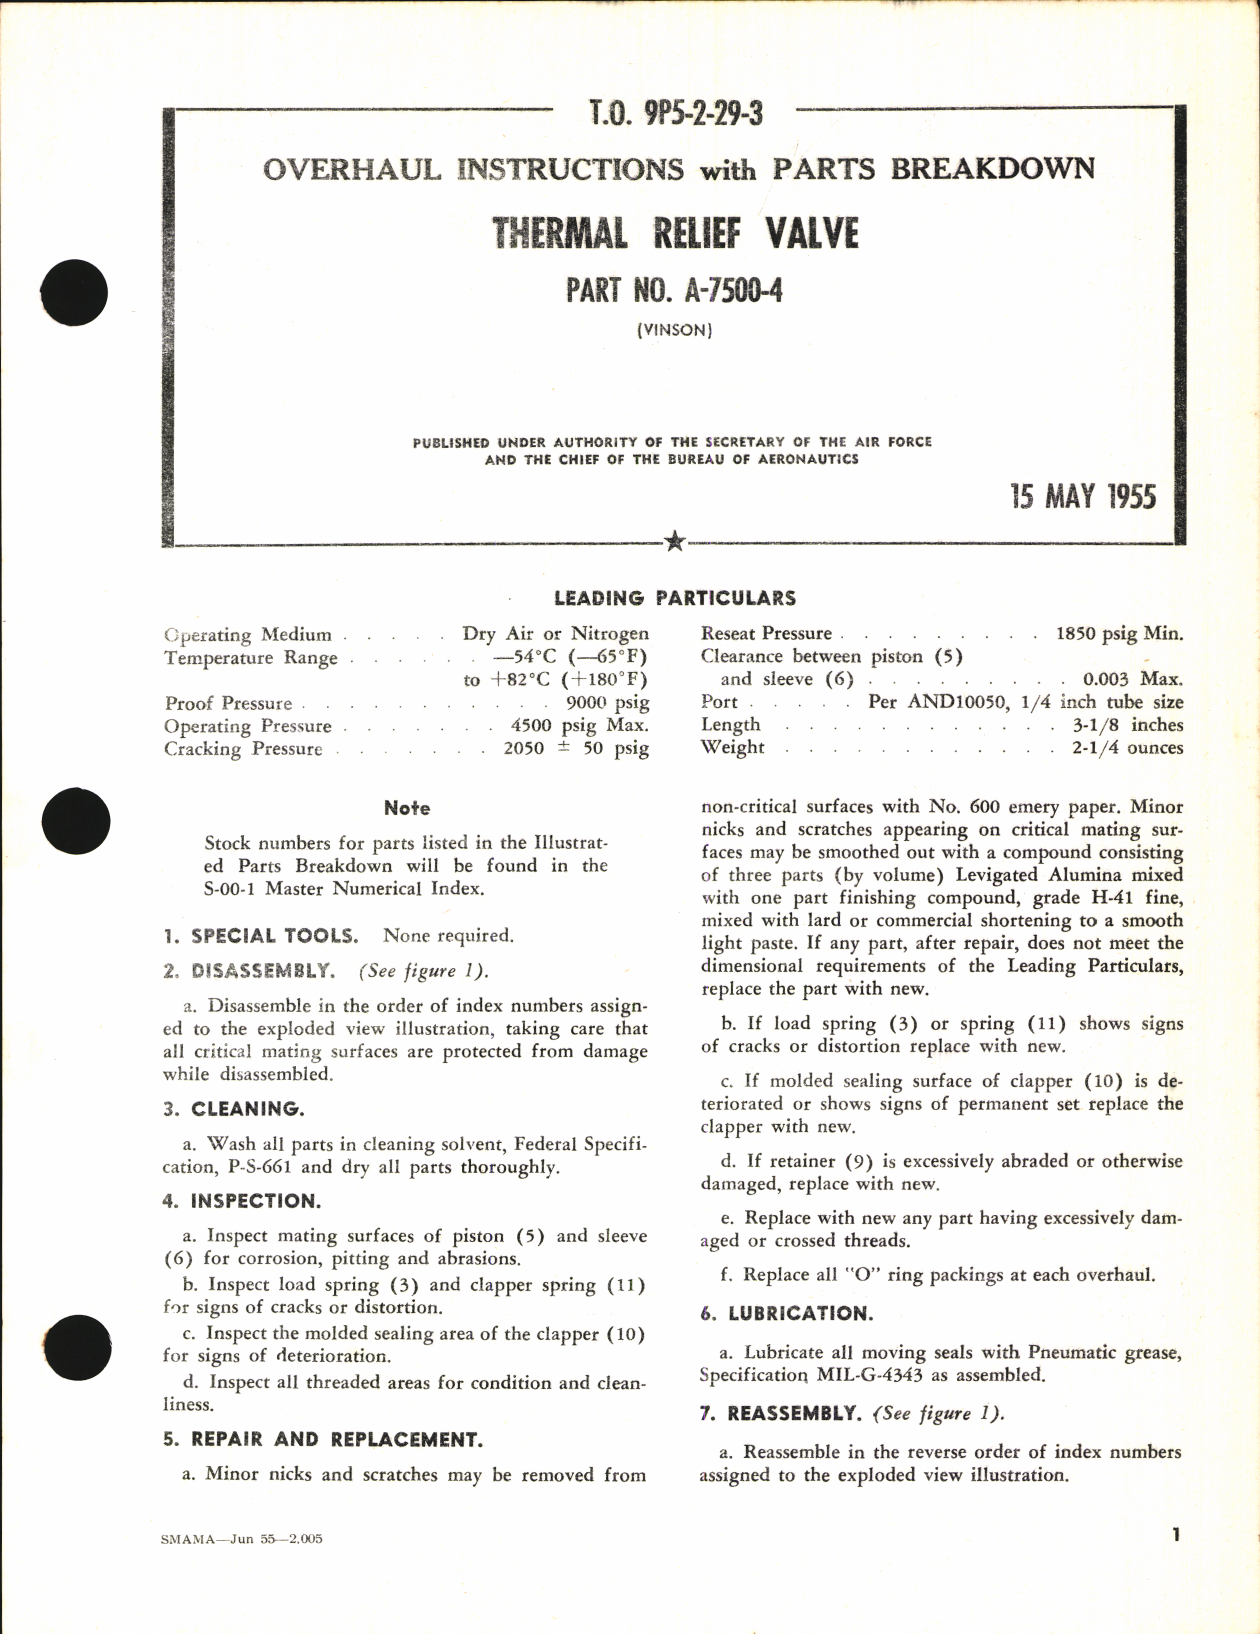 Sample page 1 from AirCorps Library document: Overhaul Instructions with Parts breakdown for Thermal Relief Valve Part No. A-7500-4